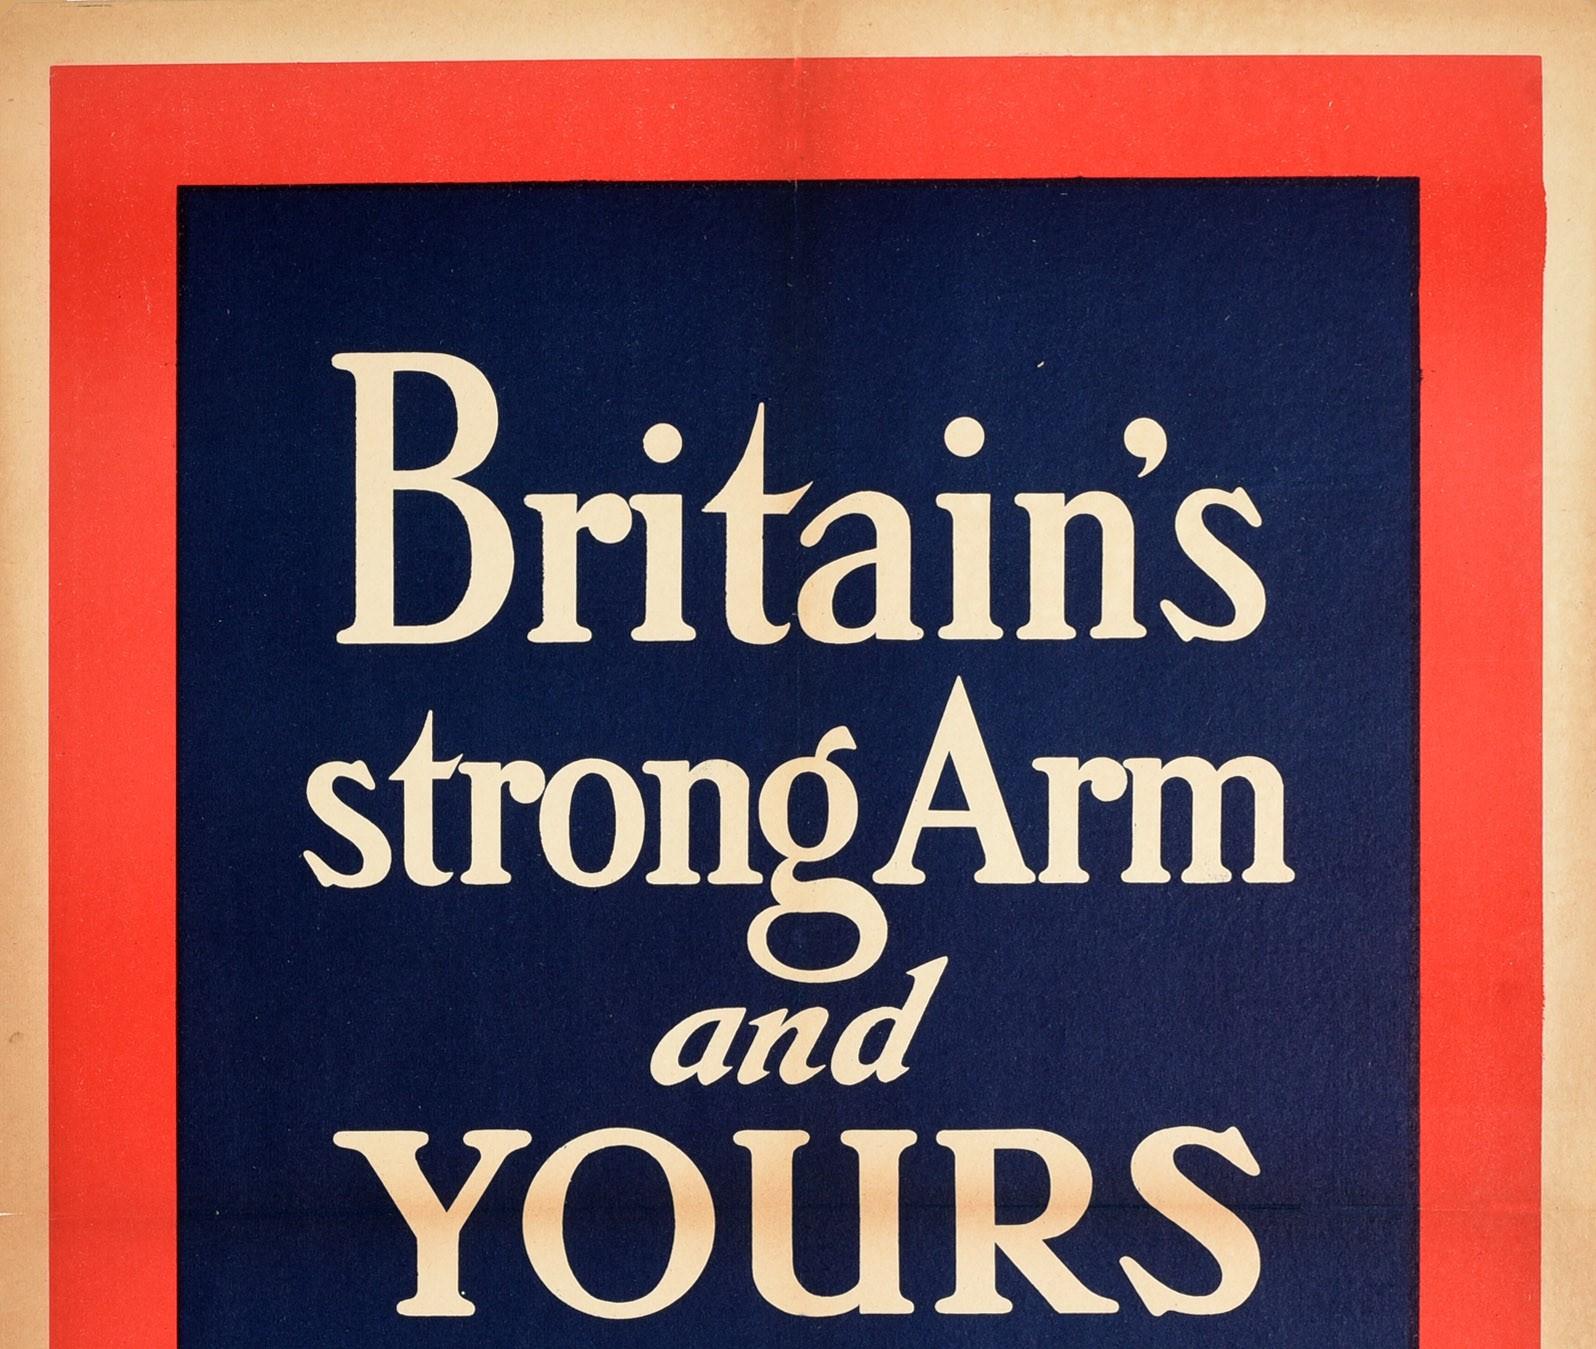 Original antique World War One military recruitment poster - Britain's Strong Arm and Yours Will Carry Us Through Enlist Now - featuring the bold white text on a blue background within a red border. Published by the Parliamentary Recruiting